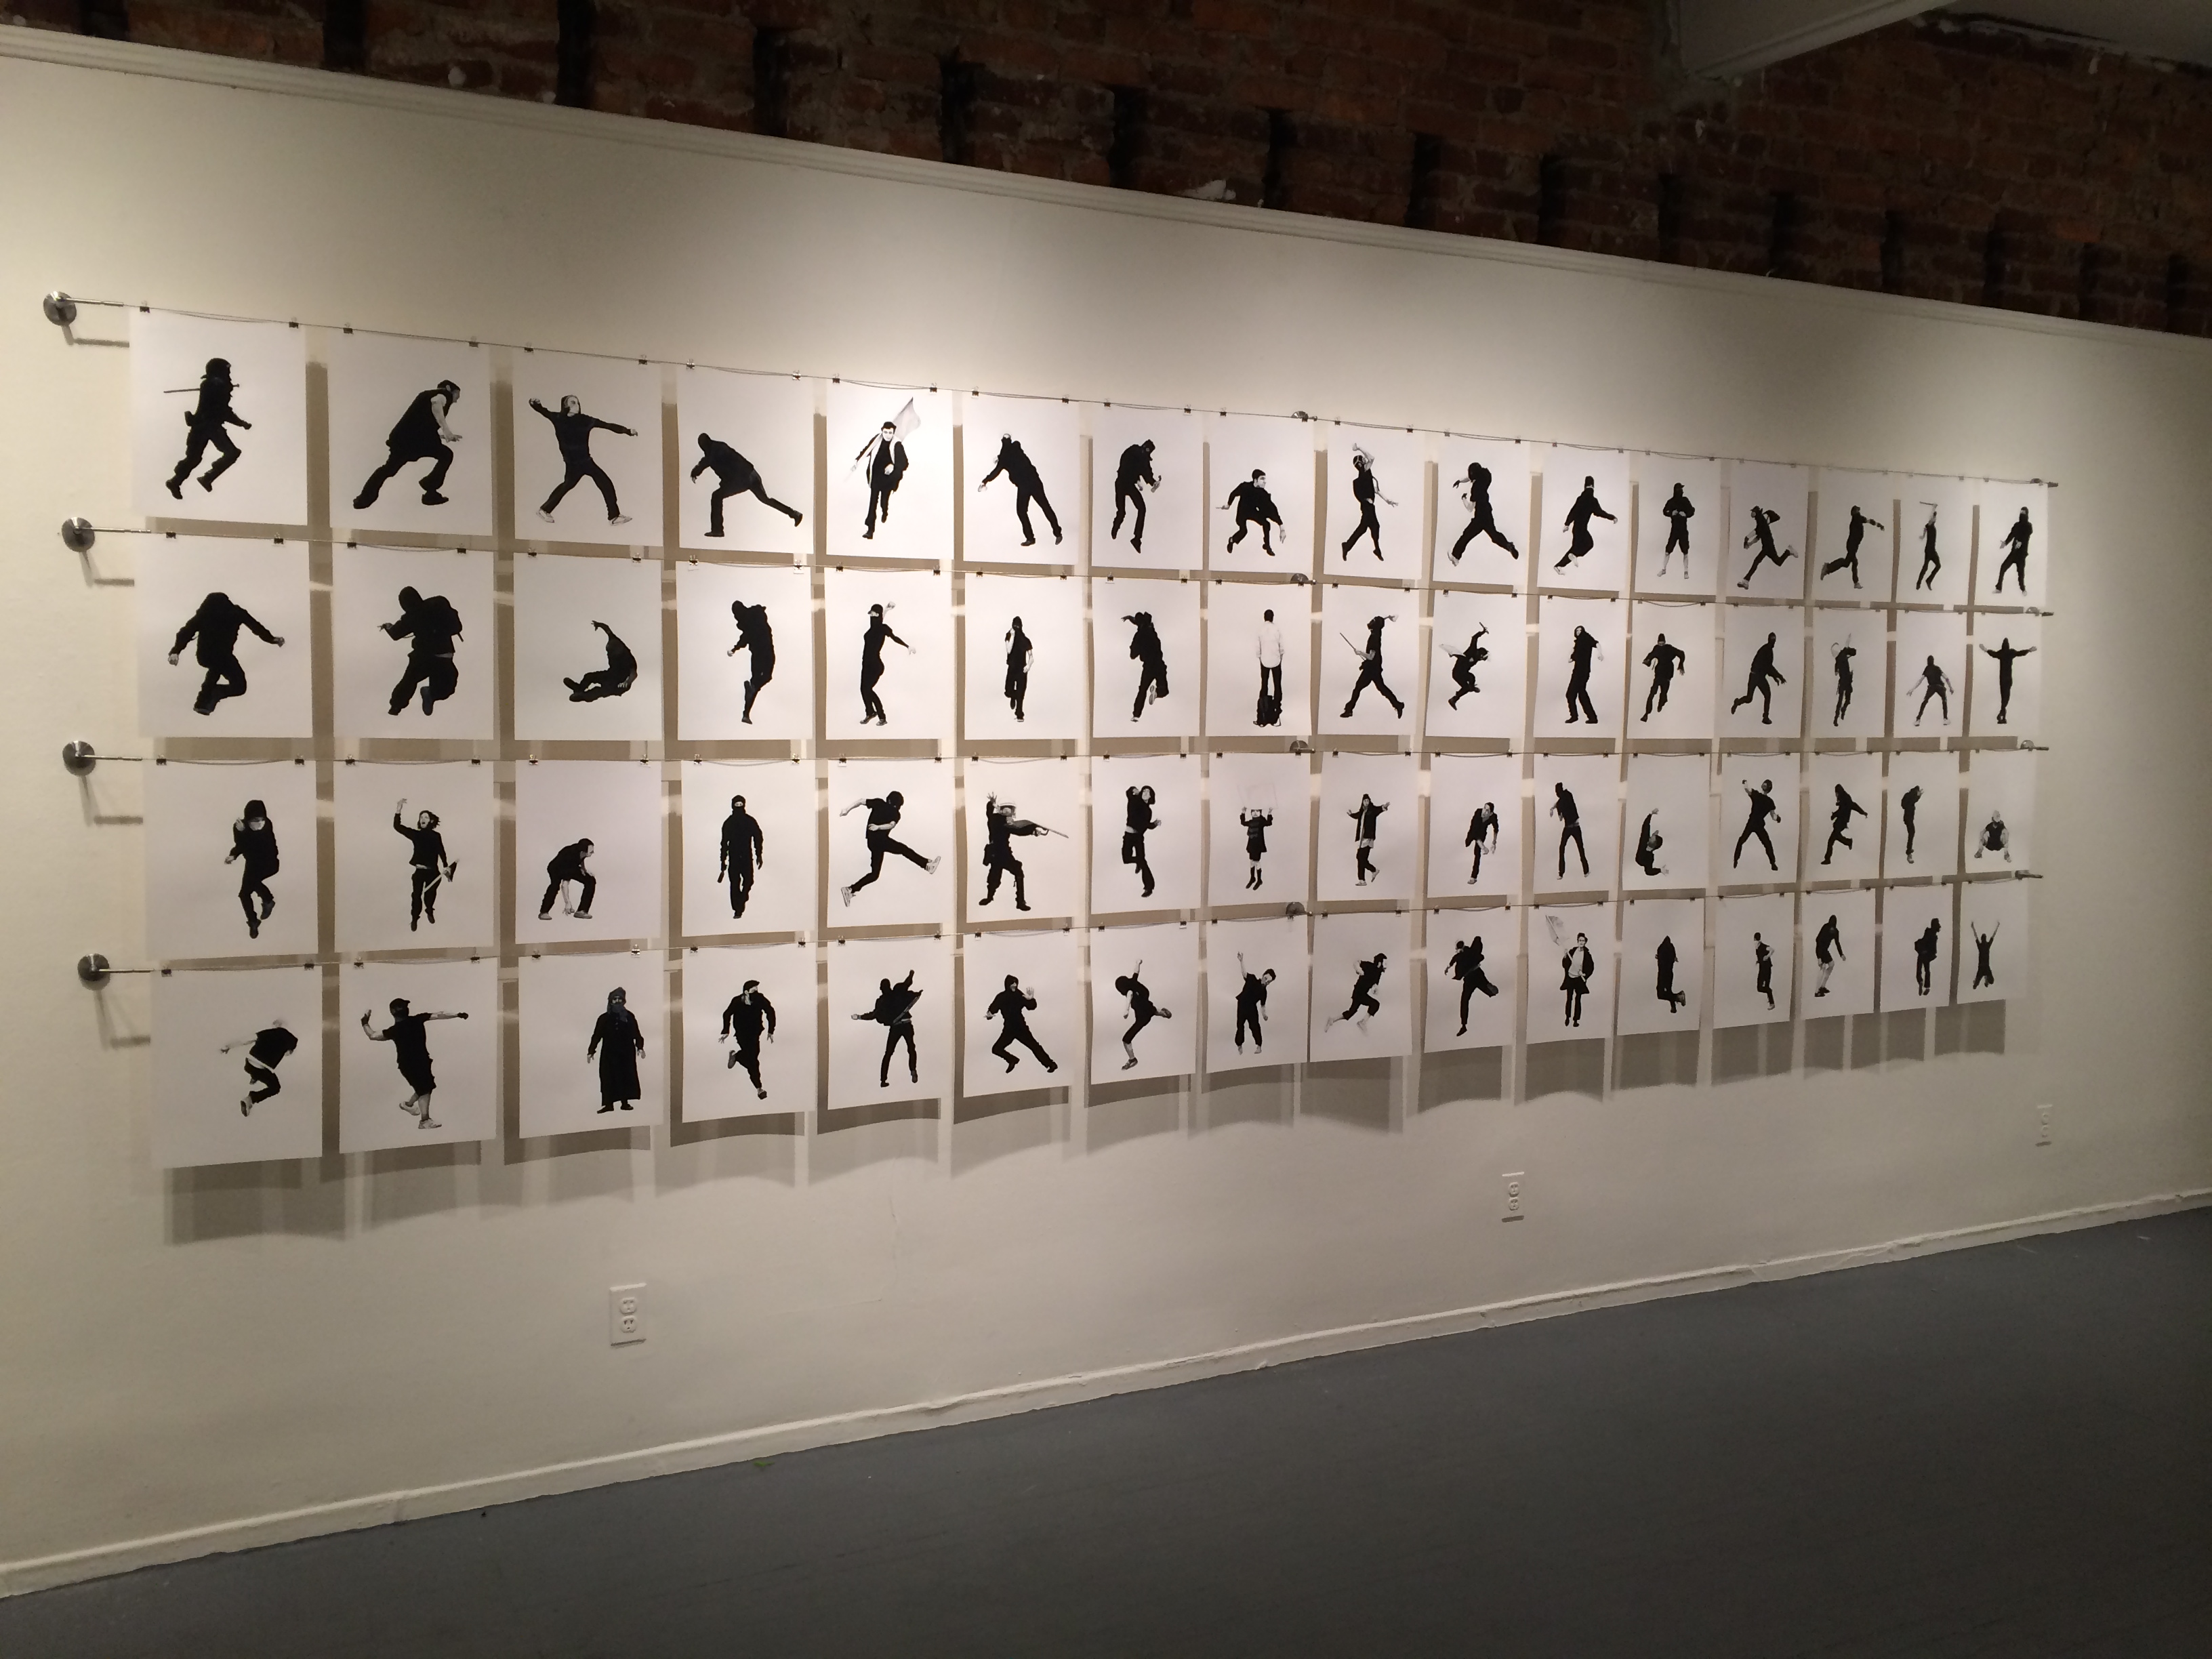 60 individual drawing of figures in black on white backgrounds